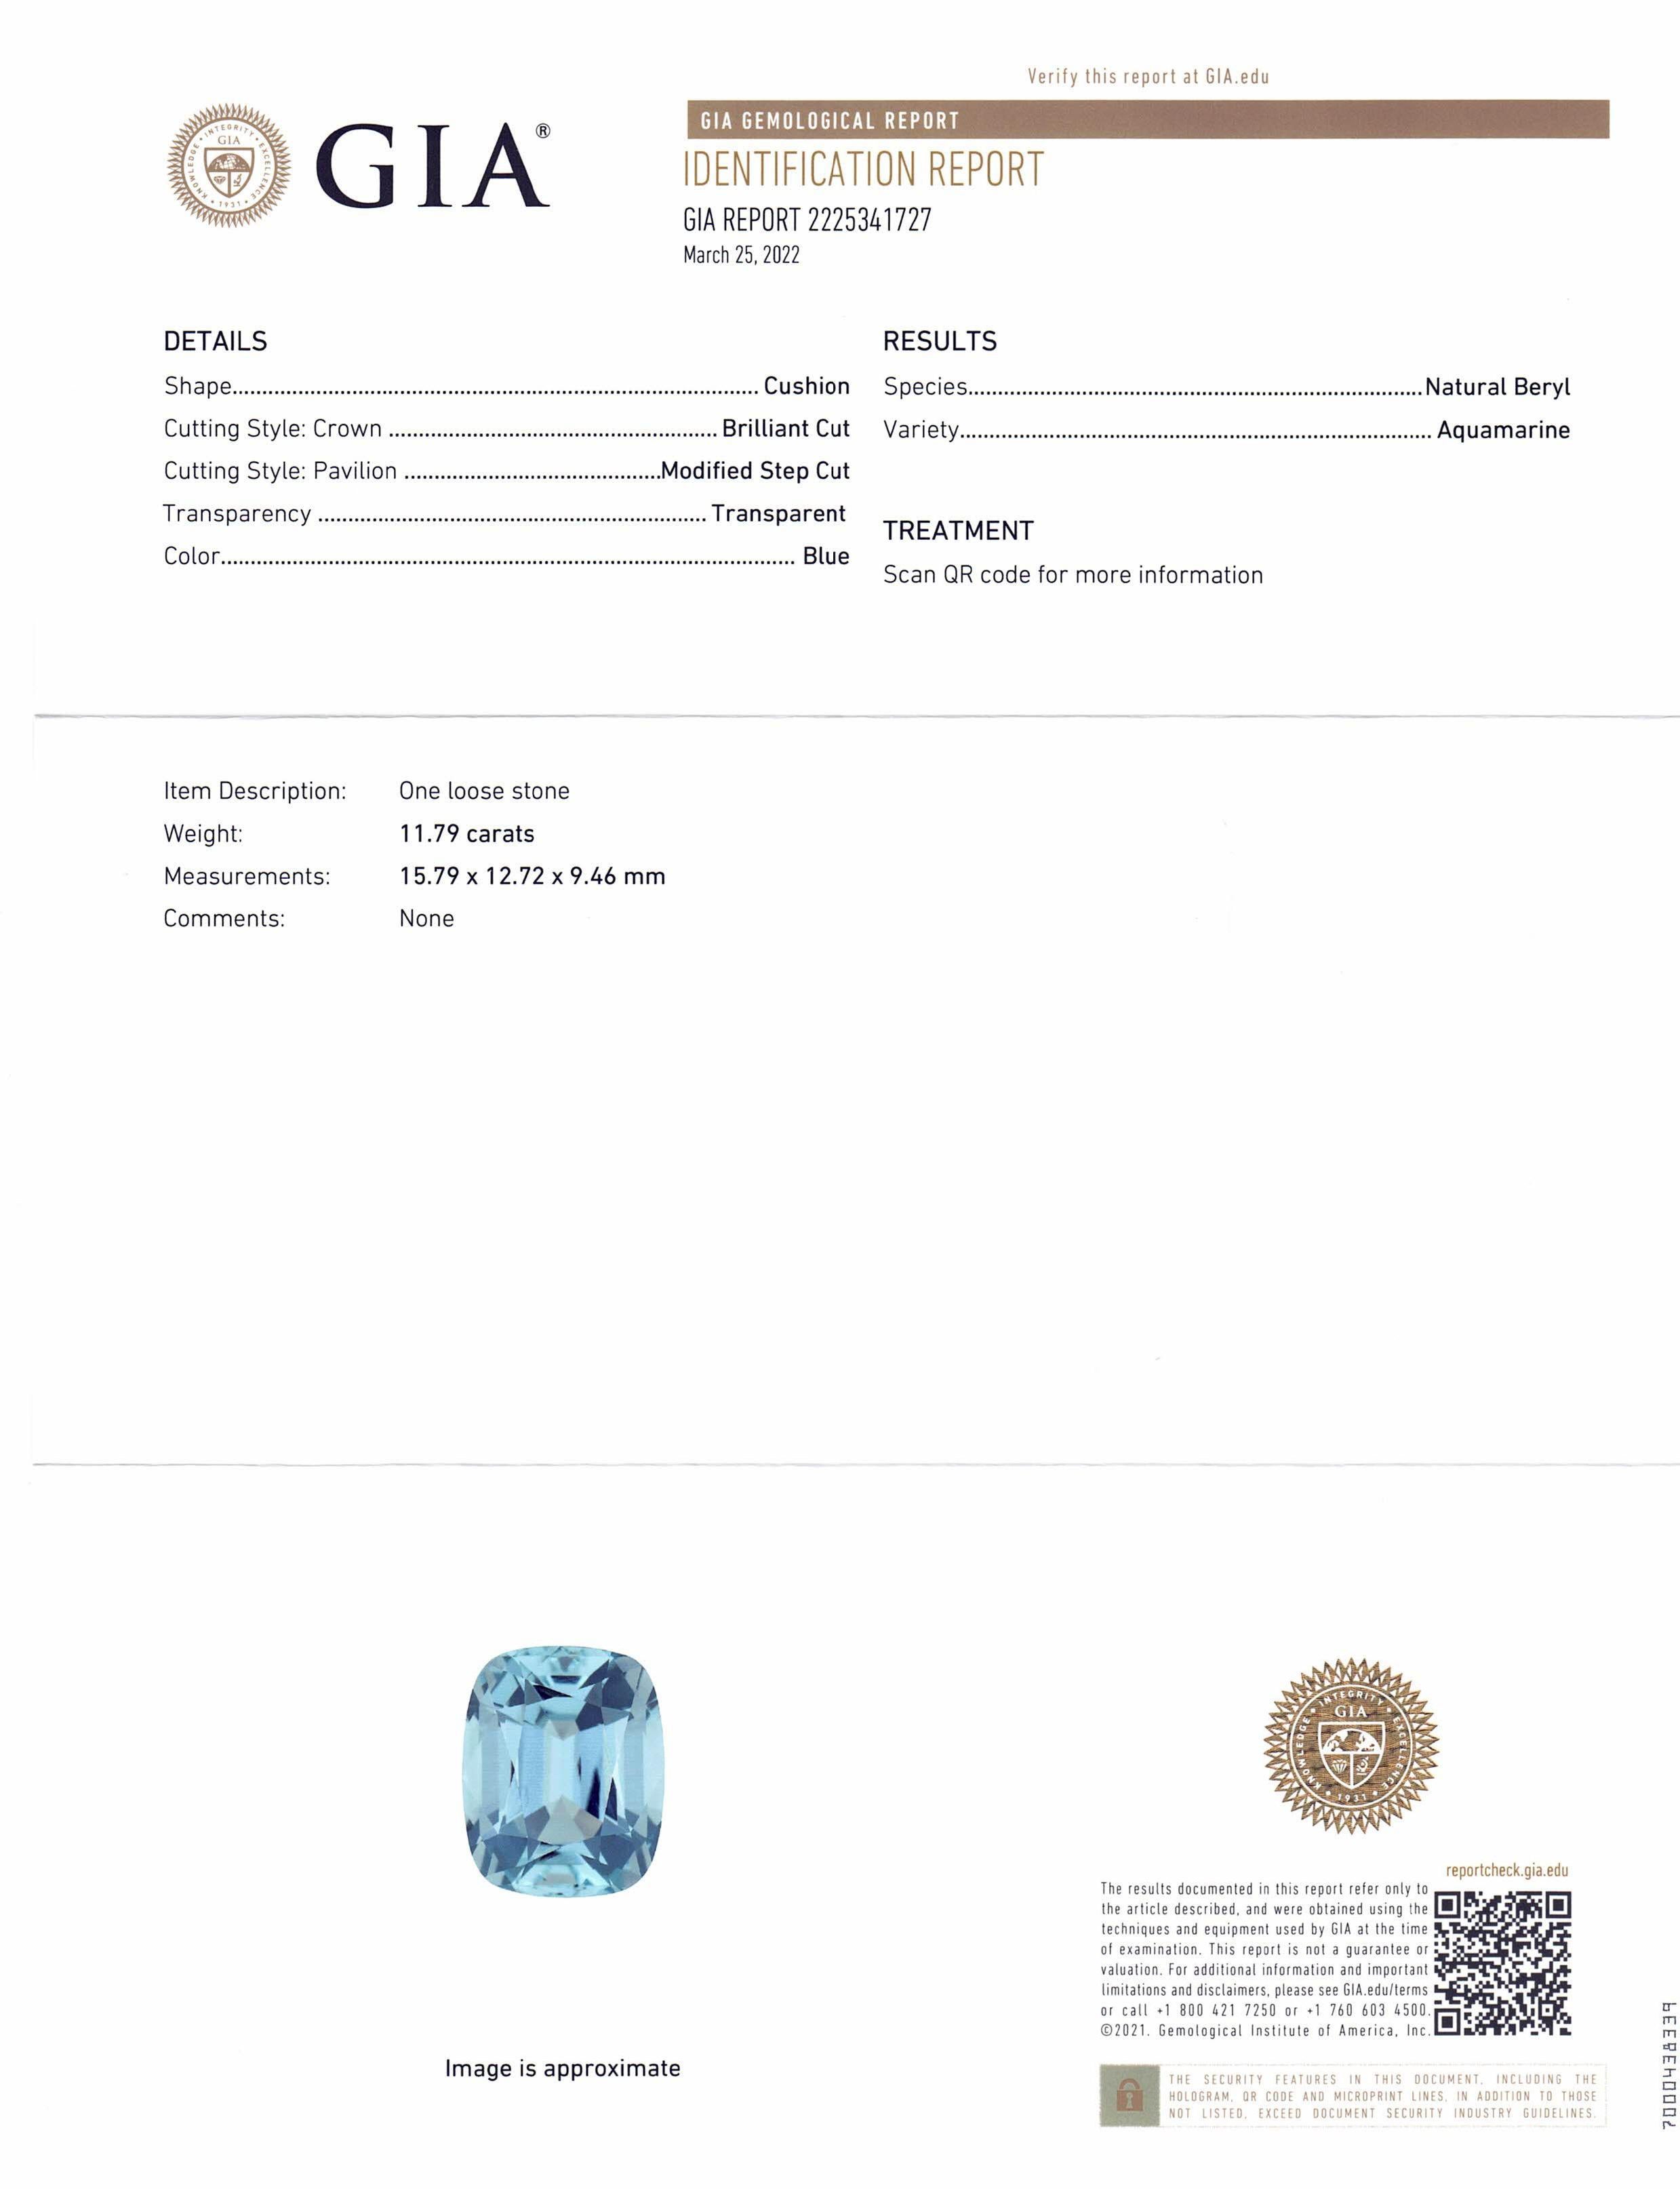 The GIA report reads as follows:

GIA Report Number: 2225341727
Shape: Cushion
Cutting Style:
Cutting Style: Crown: Brilliant Cut
Cutting Style: Pavilion: Modified Step Cut
Transparency: Transparent
Color: Blue

 

RESULTS
Species: Natural